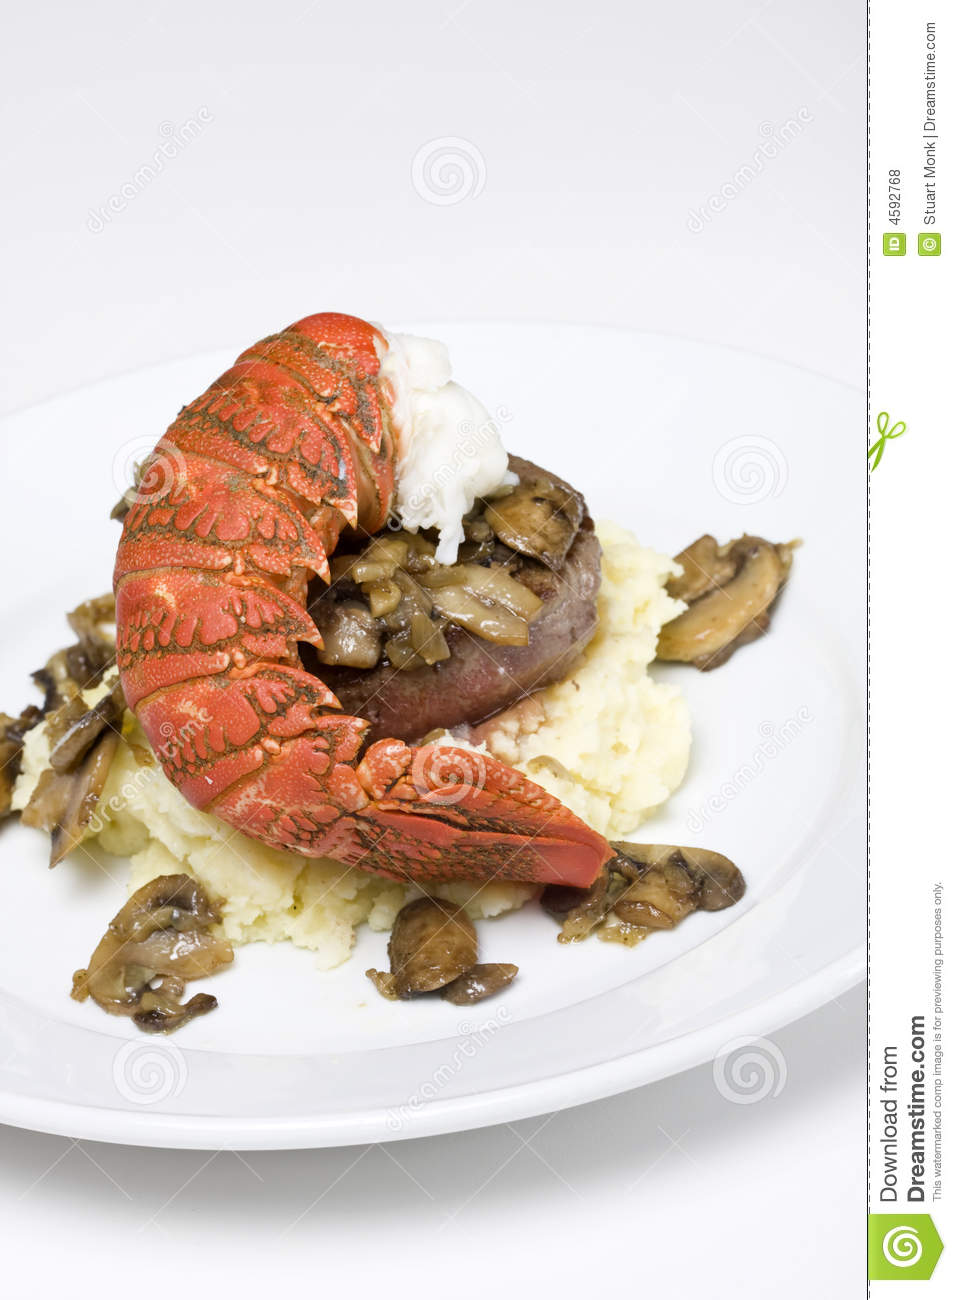 Filet Steak And Lobster Royalty Free Stock Photos   Image  4592768